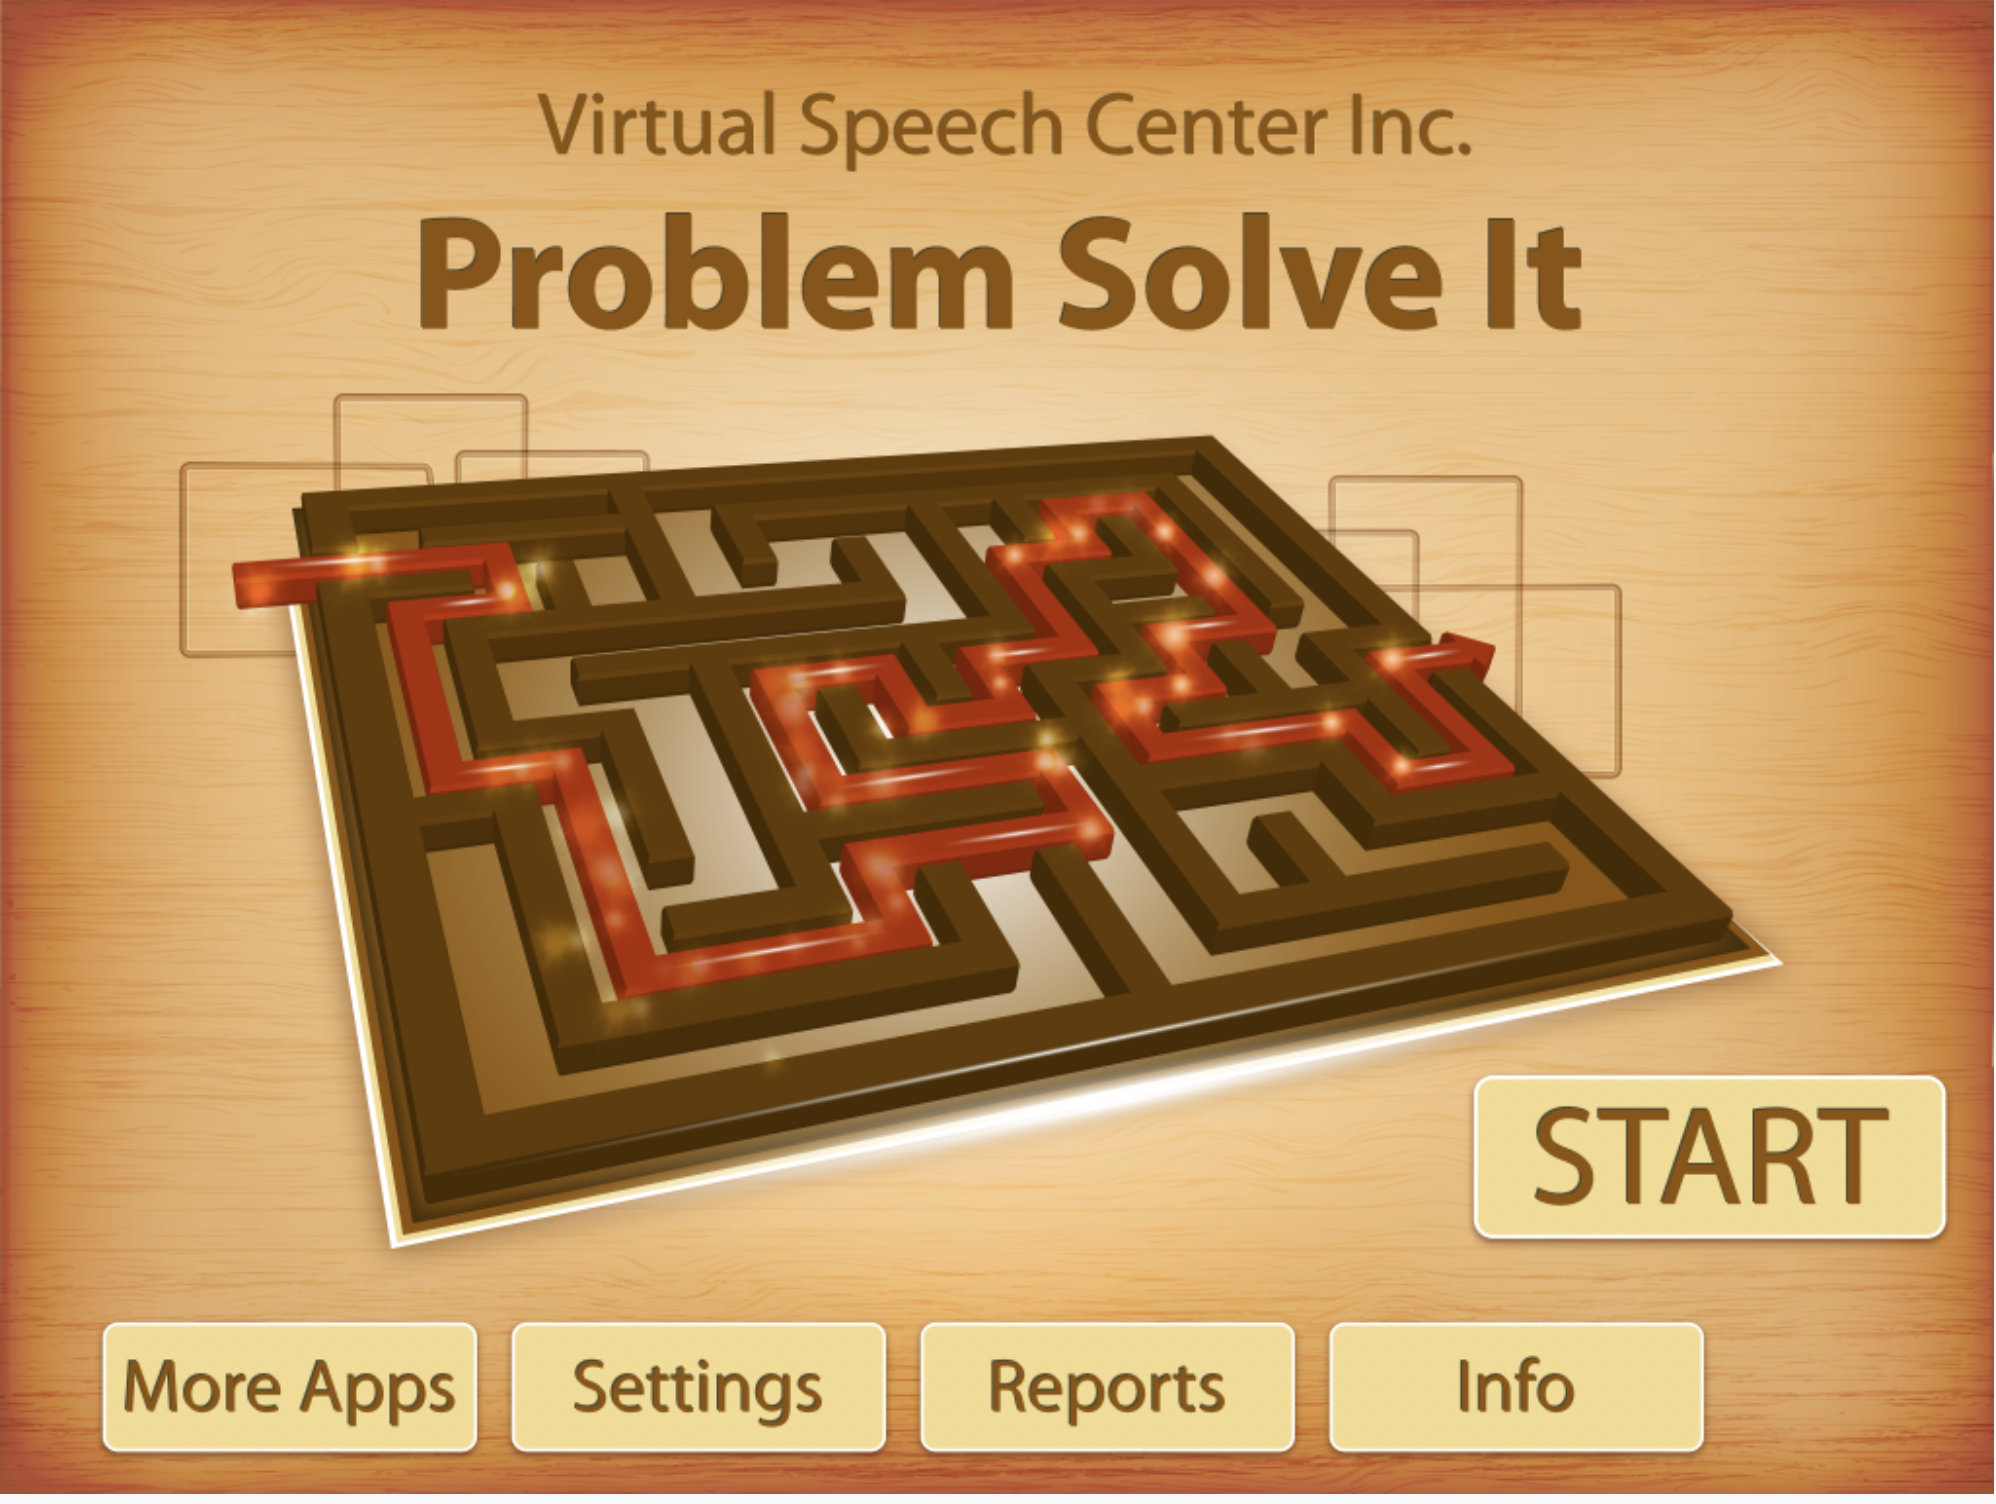 Screen shot from problem solve it - shows a maze to depict problem solving